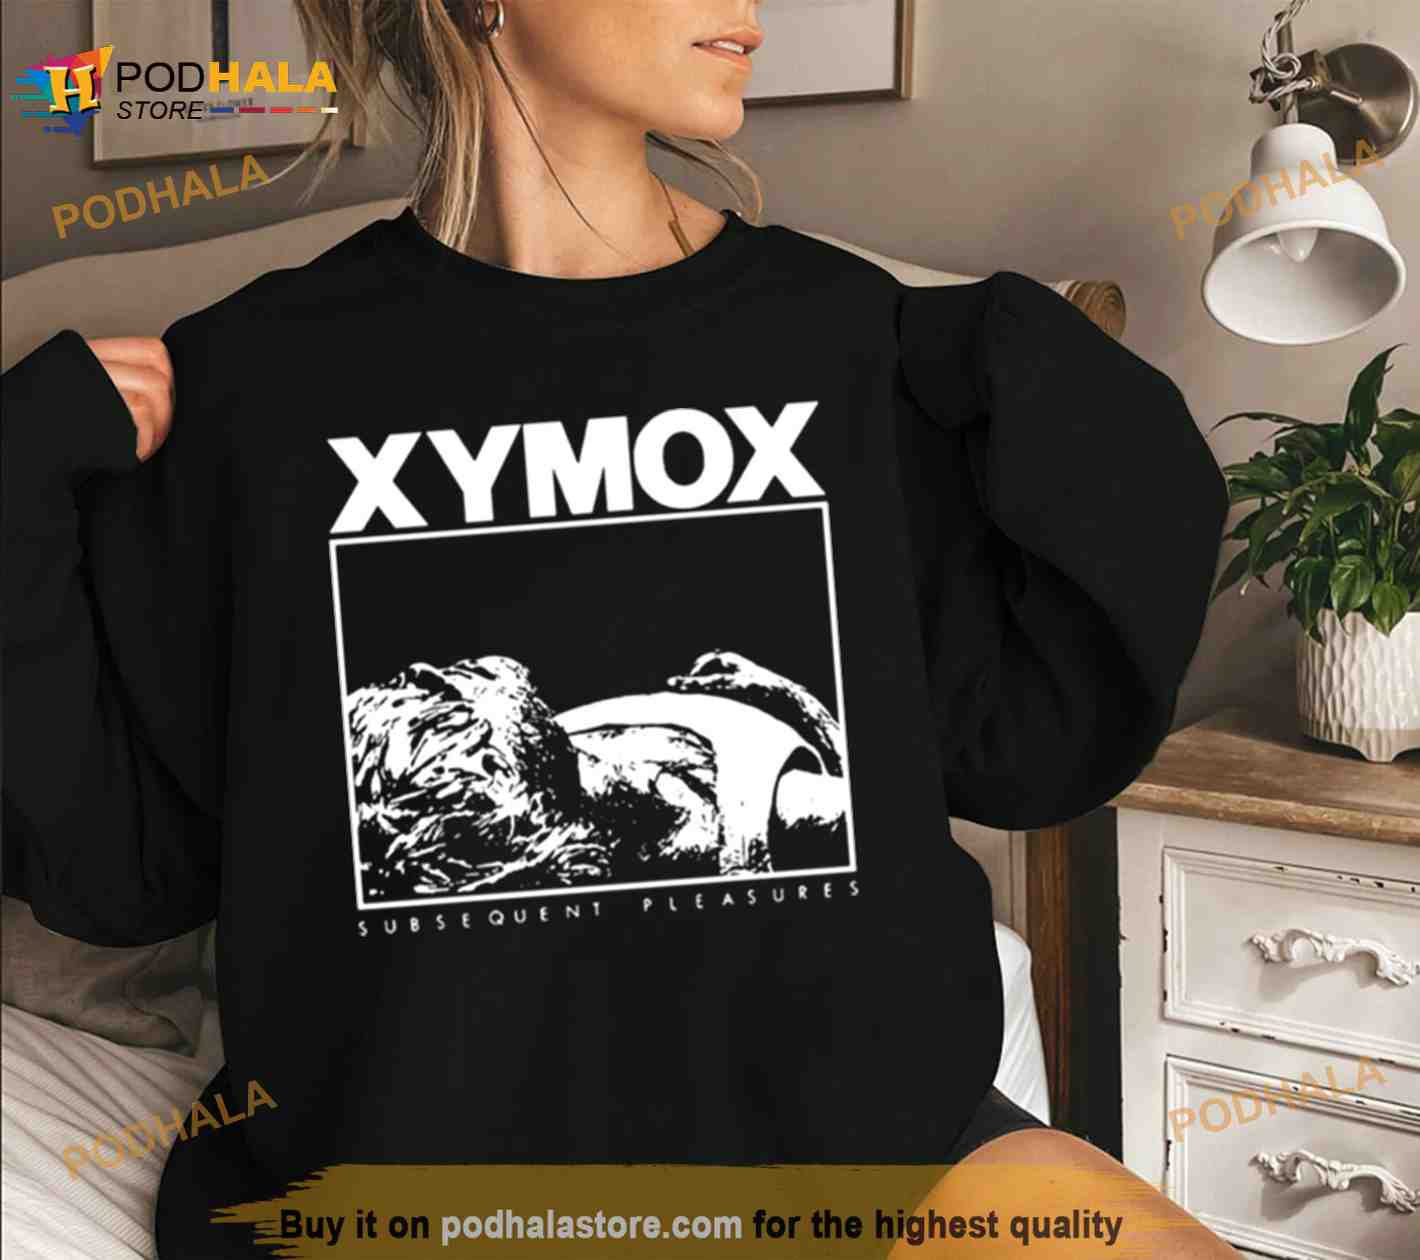 Clan Of Xymox Subsequent Pleasures Shirt - Bring Your Ideas